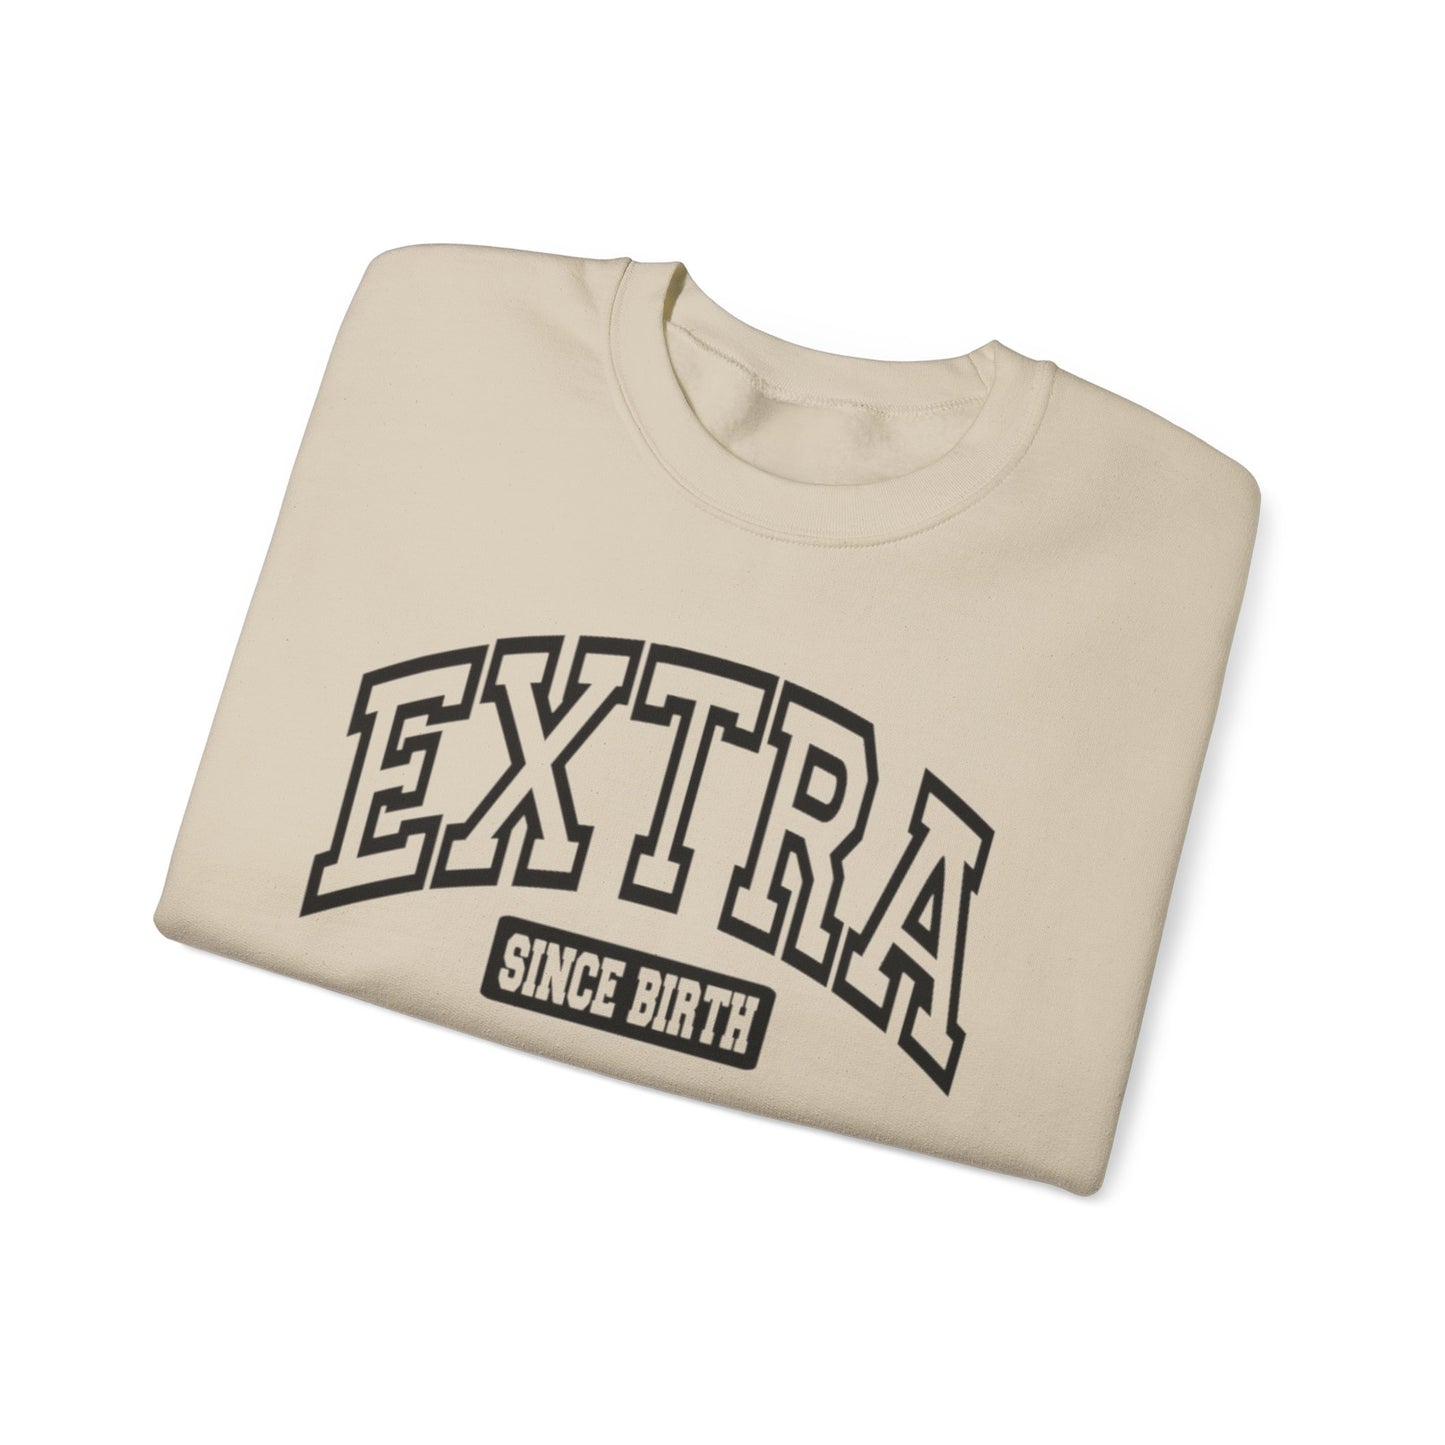 Extra Since Birth Unisex Statement Sweatshirt for Fabulous Fashionista, Over the top Sweatshirt to Stand Out, Mental Health Awareness Proud